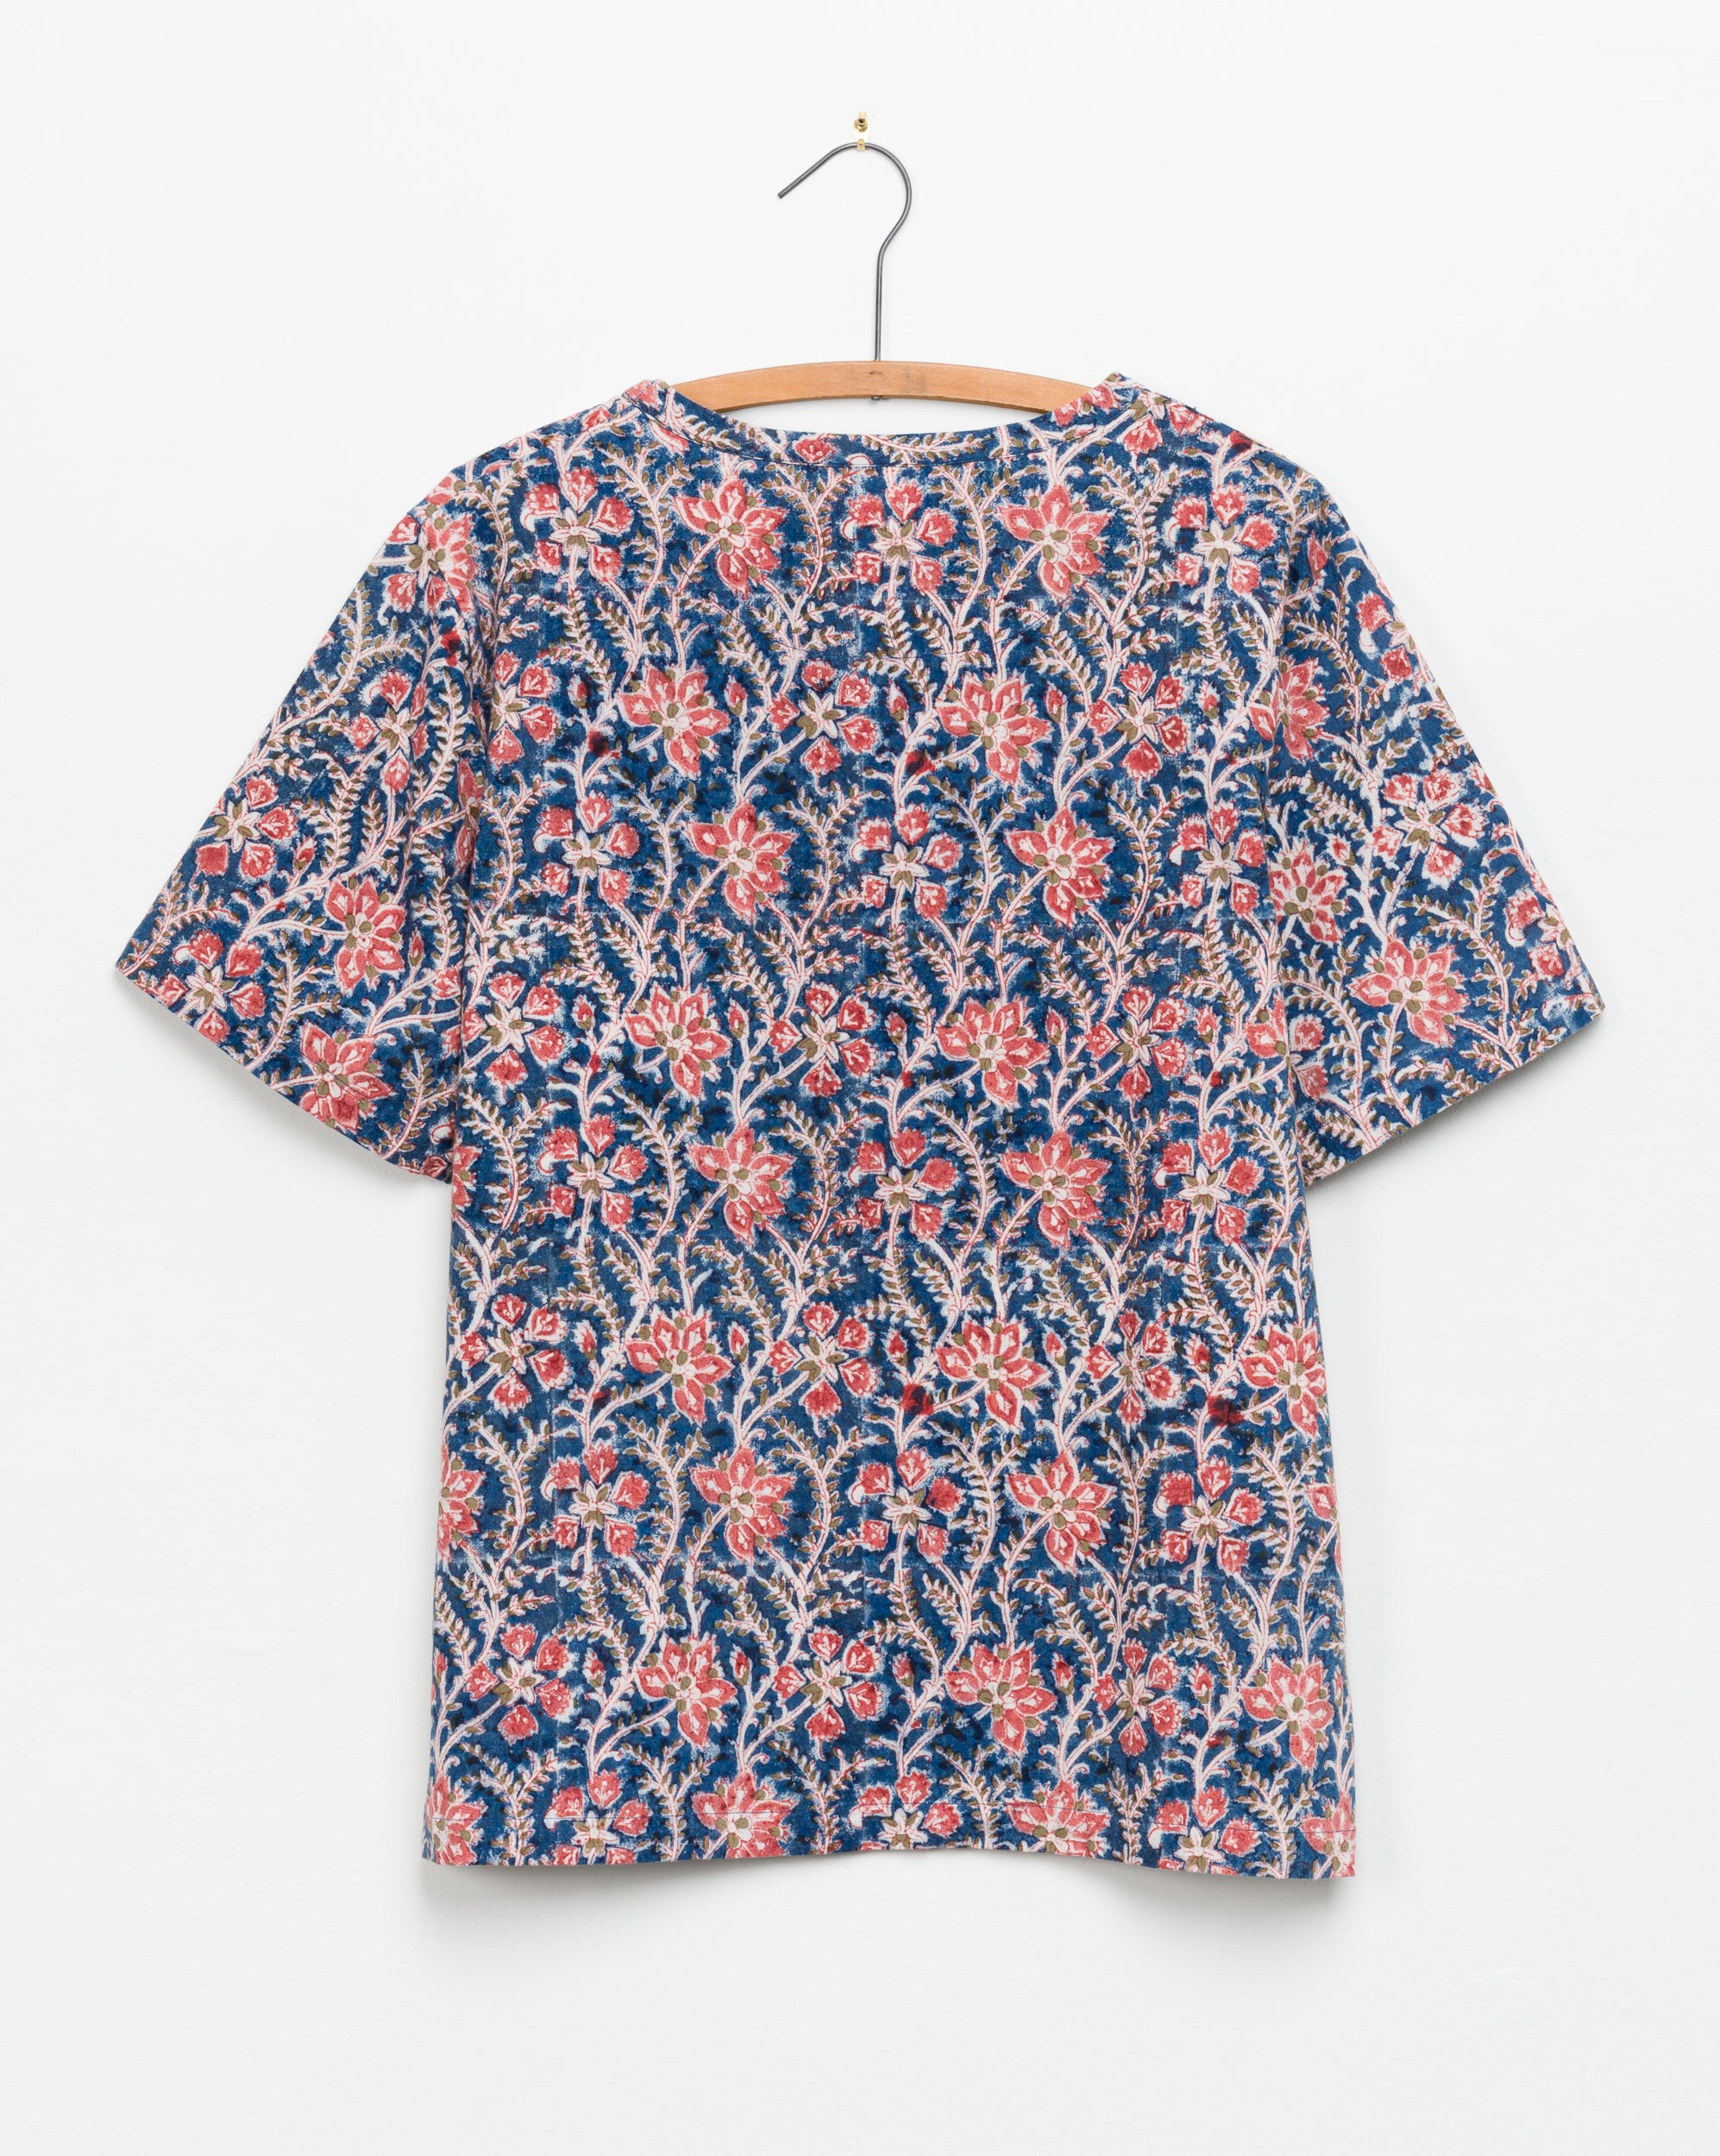 Tej Woven Tee in Blue Floral